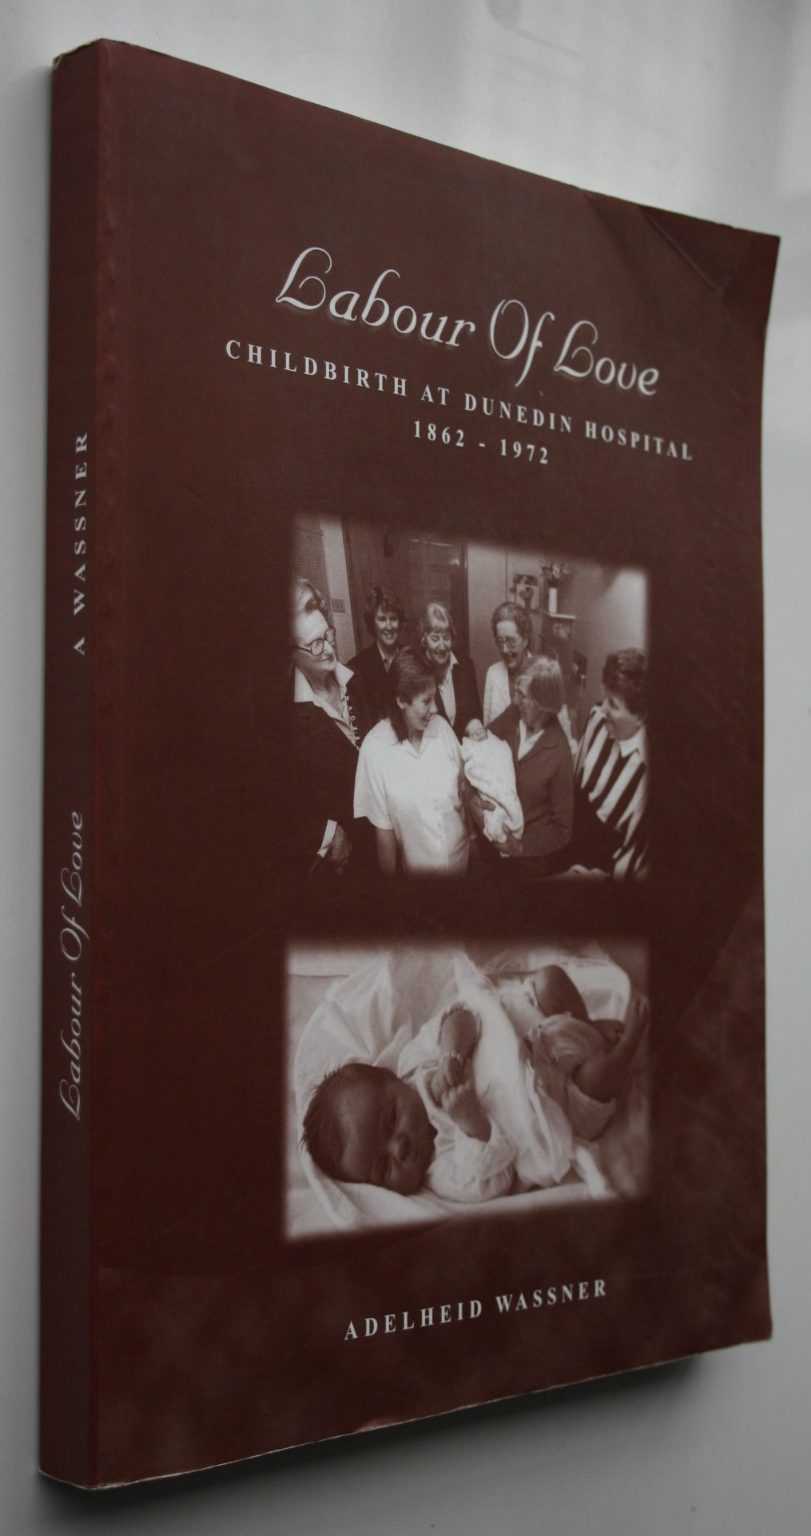 Labour of Love Childbirth at Dunedin Hospital, 1862-1972 by Adelheid Wassner. SIGNED BY AUTHOR.